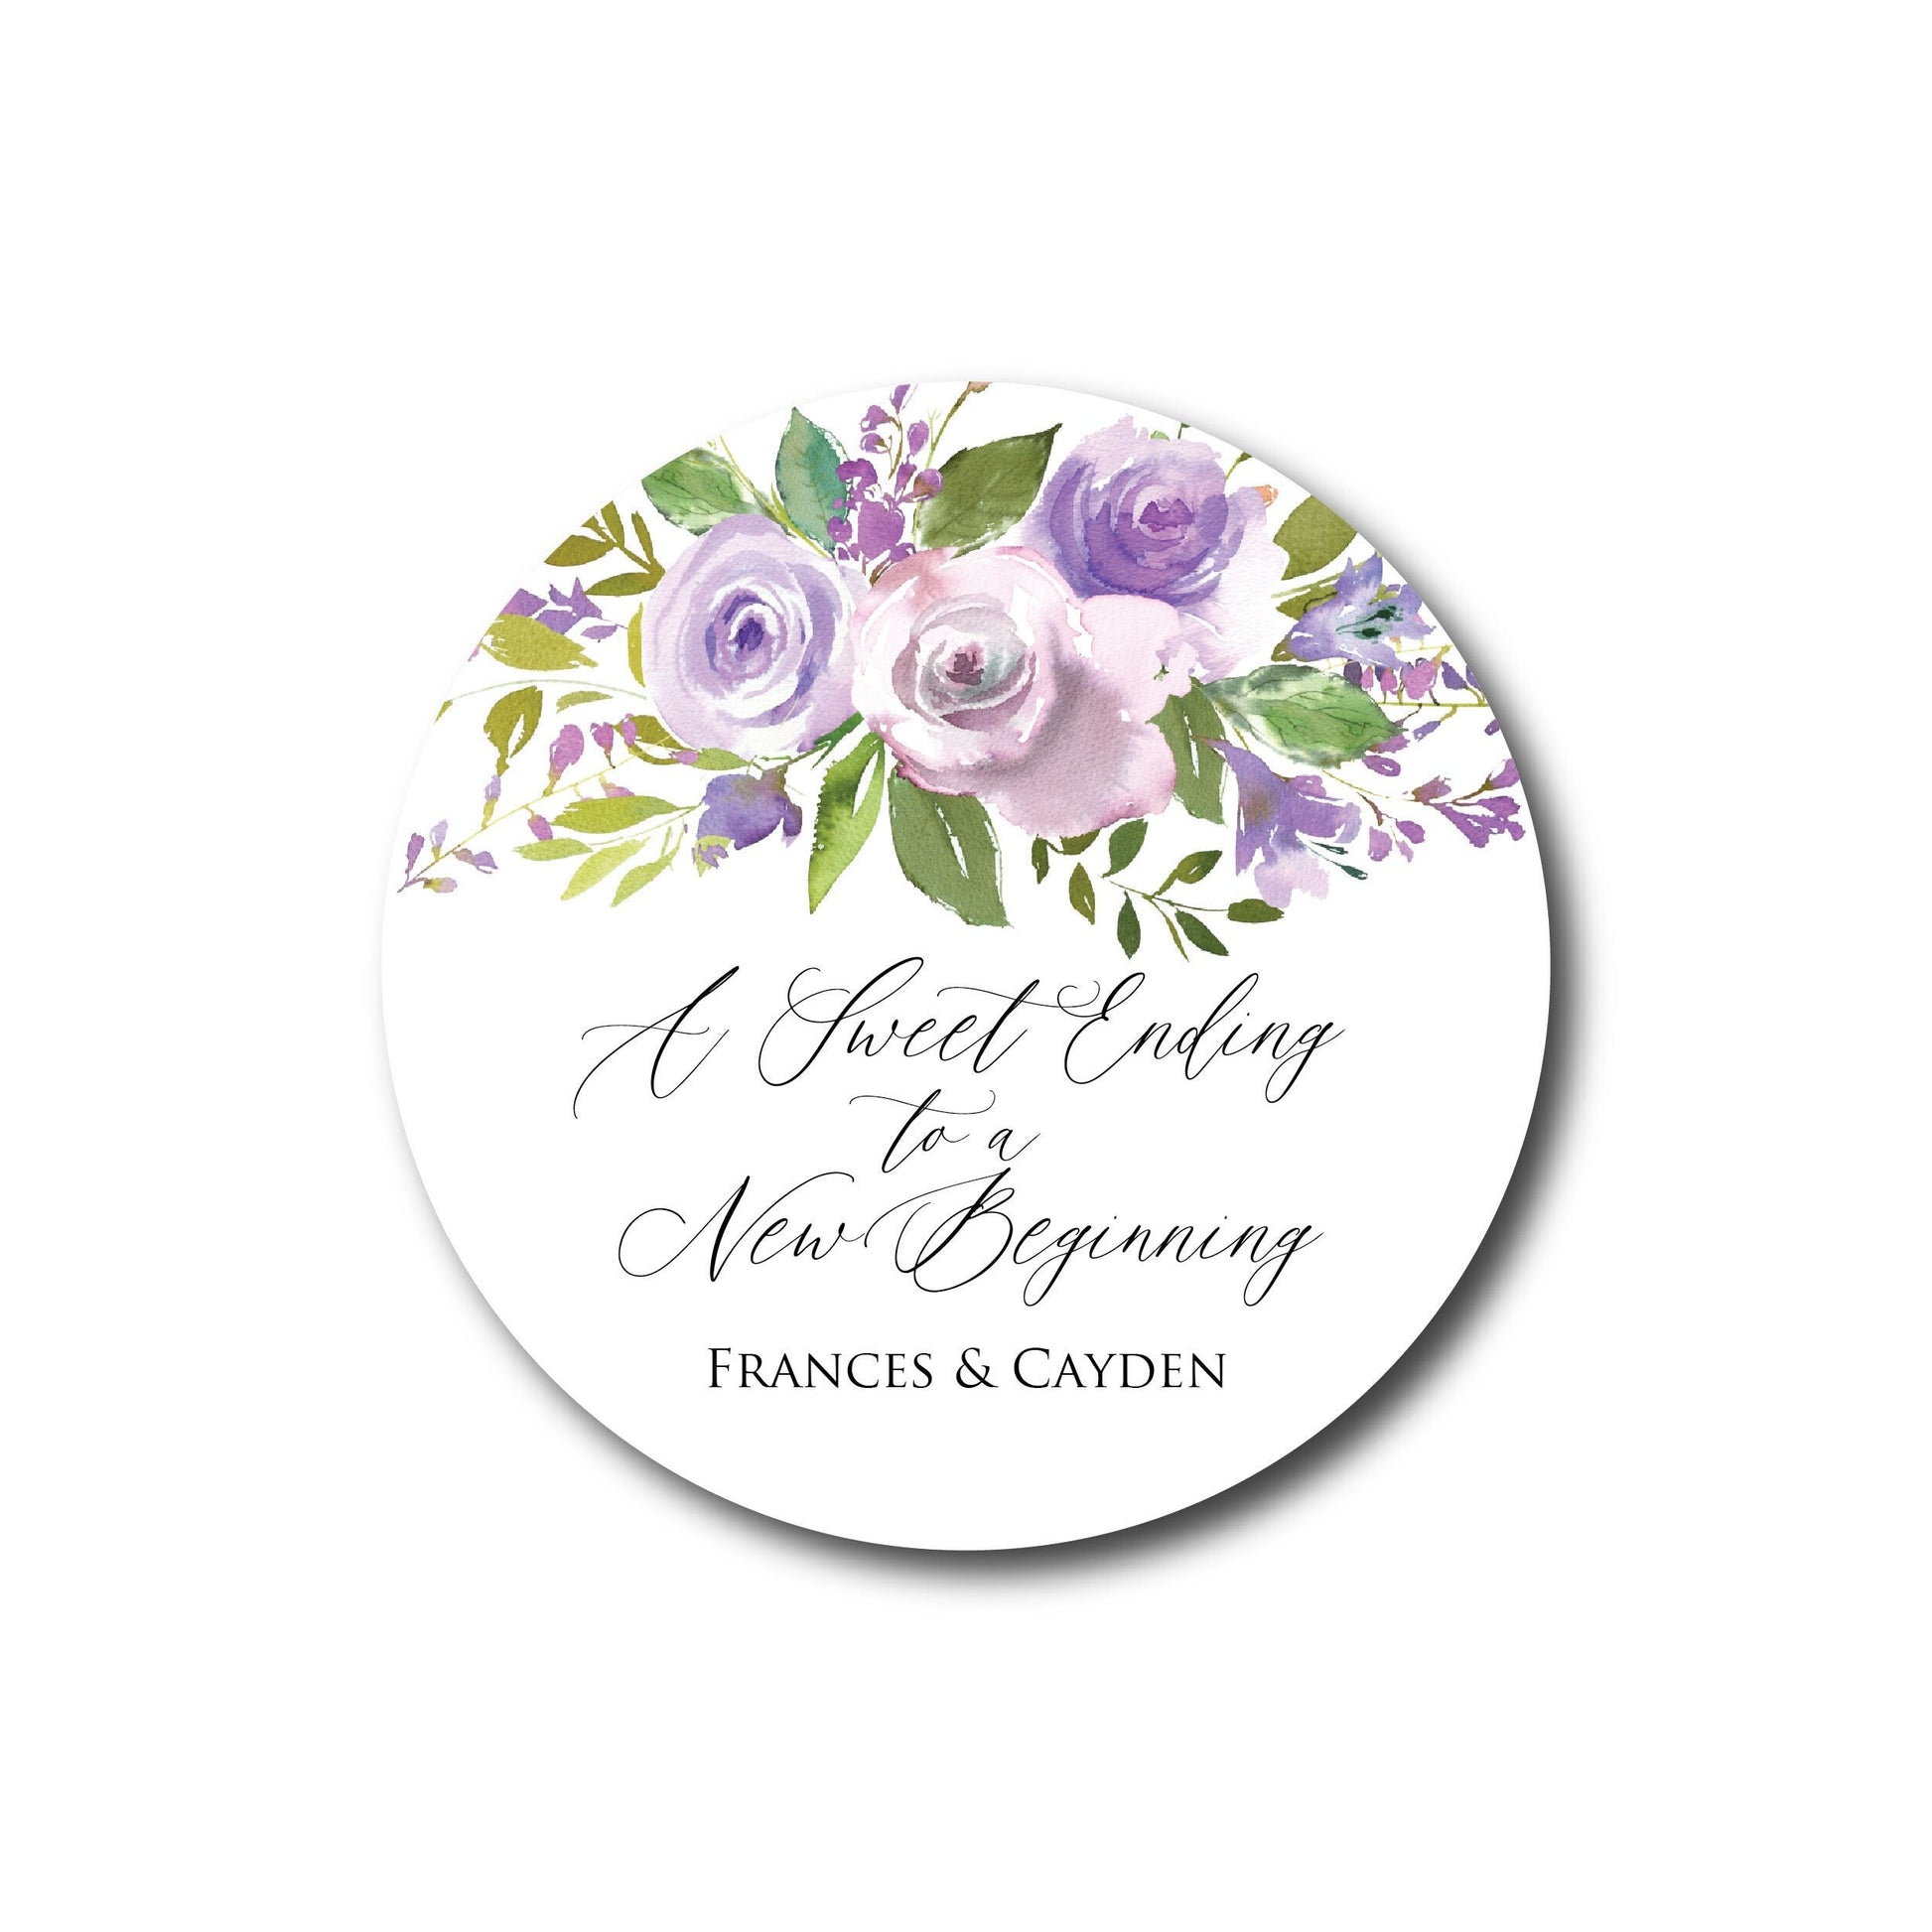 Sweet Ending to a New Beginning Wedding Stickers Wedding Favor Stickers Wedding Favor Labels Purple Floral Greenery Labels Lavender Favor